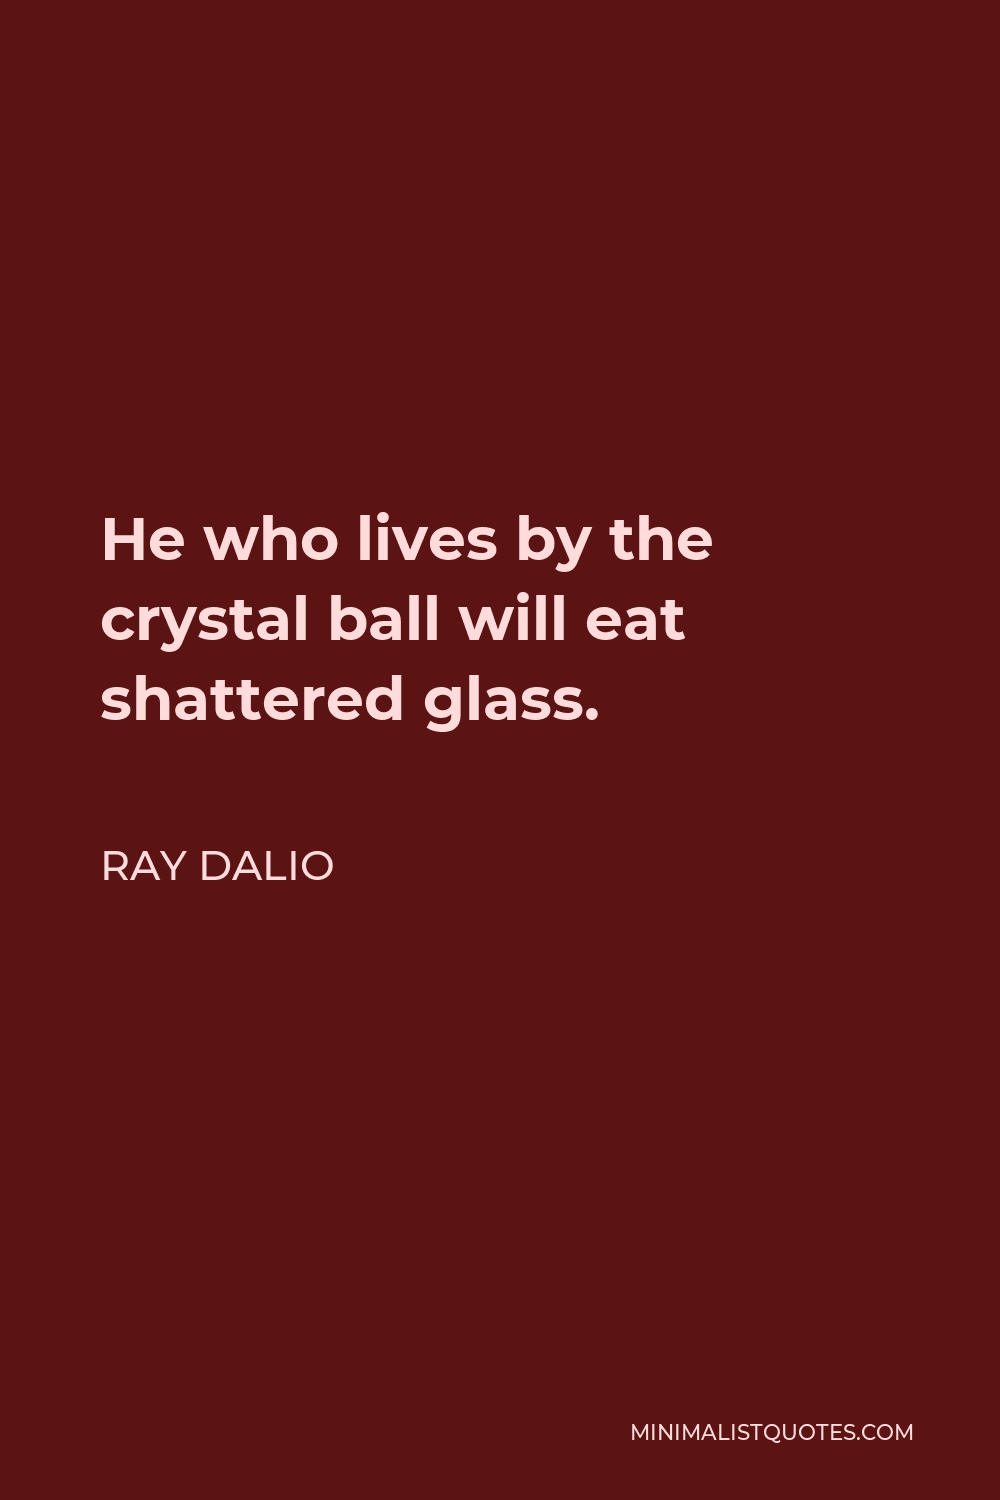 Ray Dalio Quote - He who lives by the crystal ball will eat shattered glass.